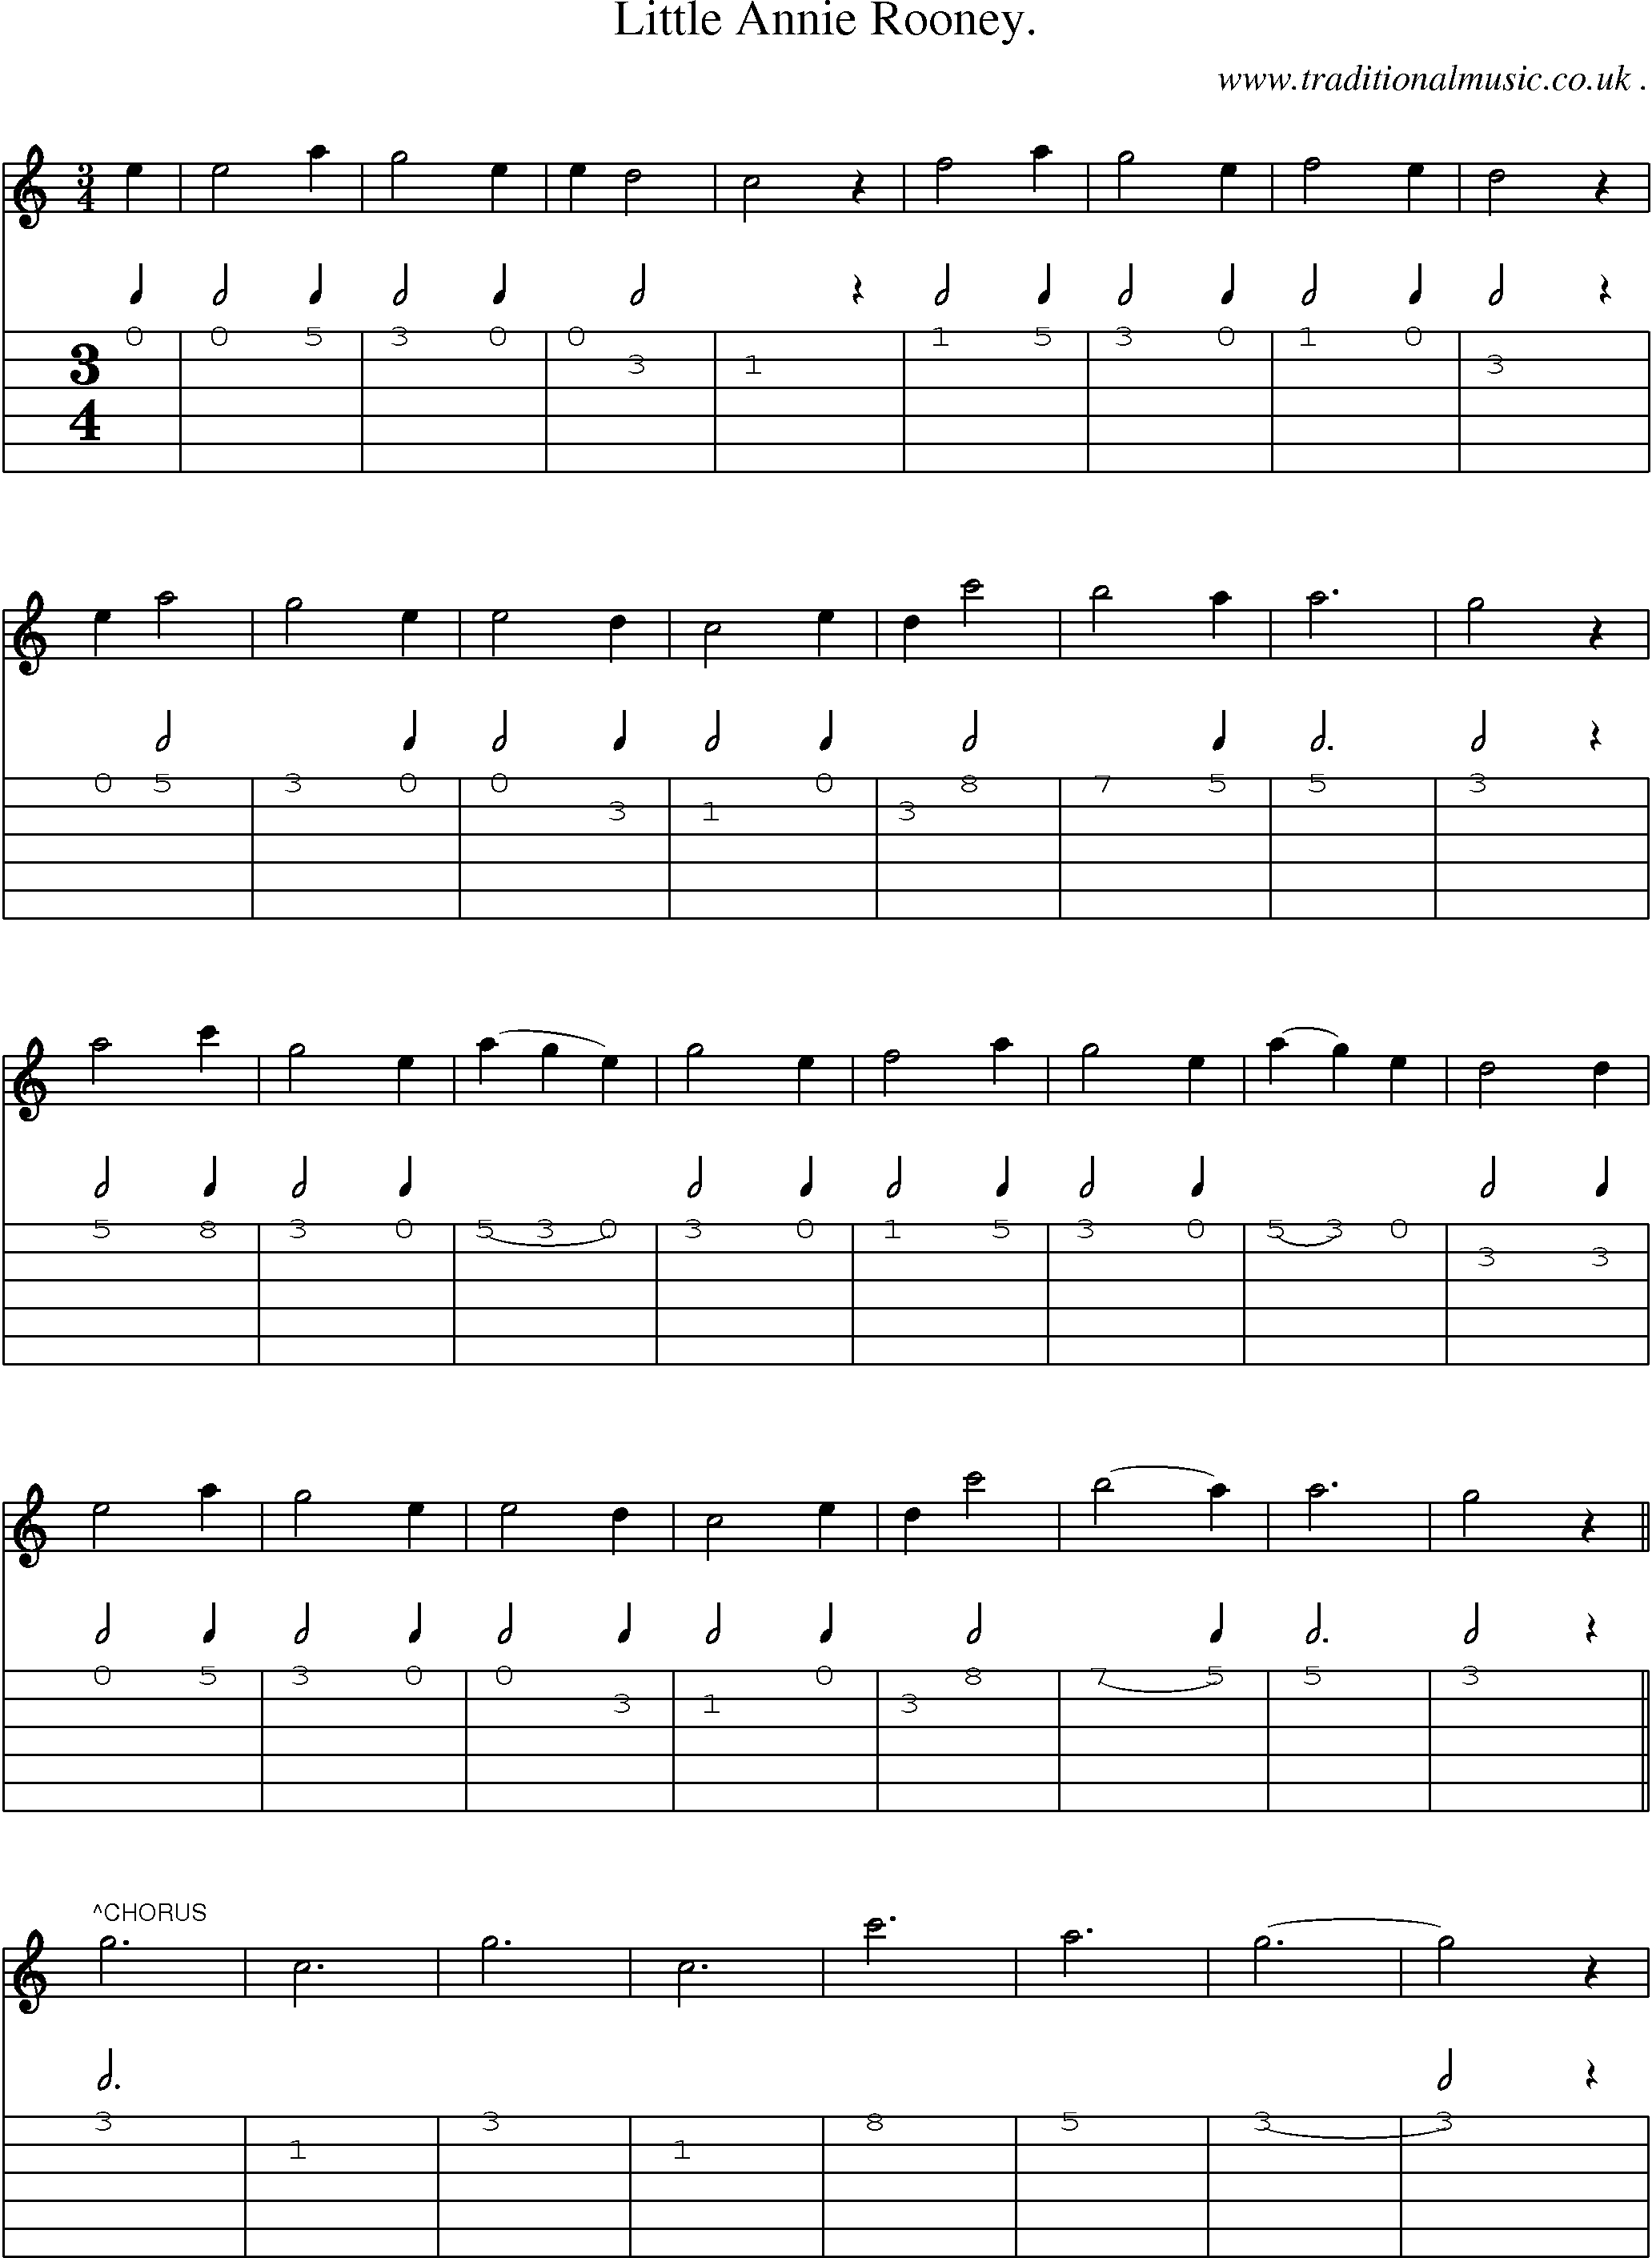 Sheet-Music and Guitar Tabs for Little Annie Rooney